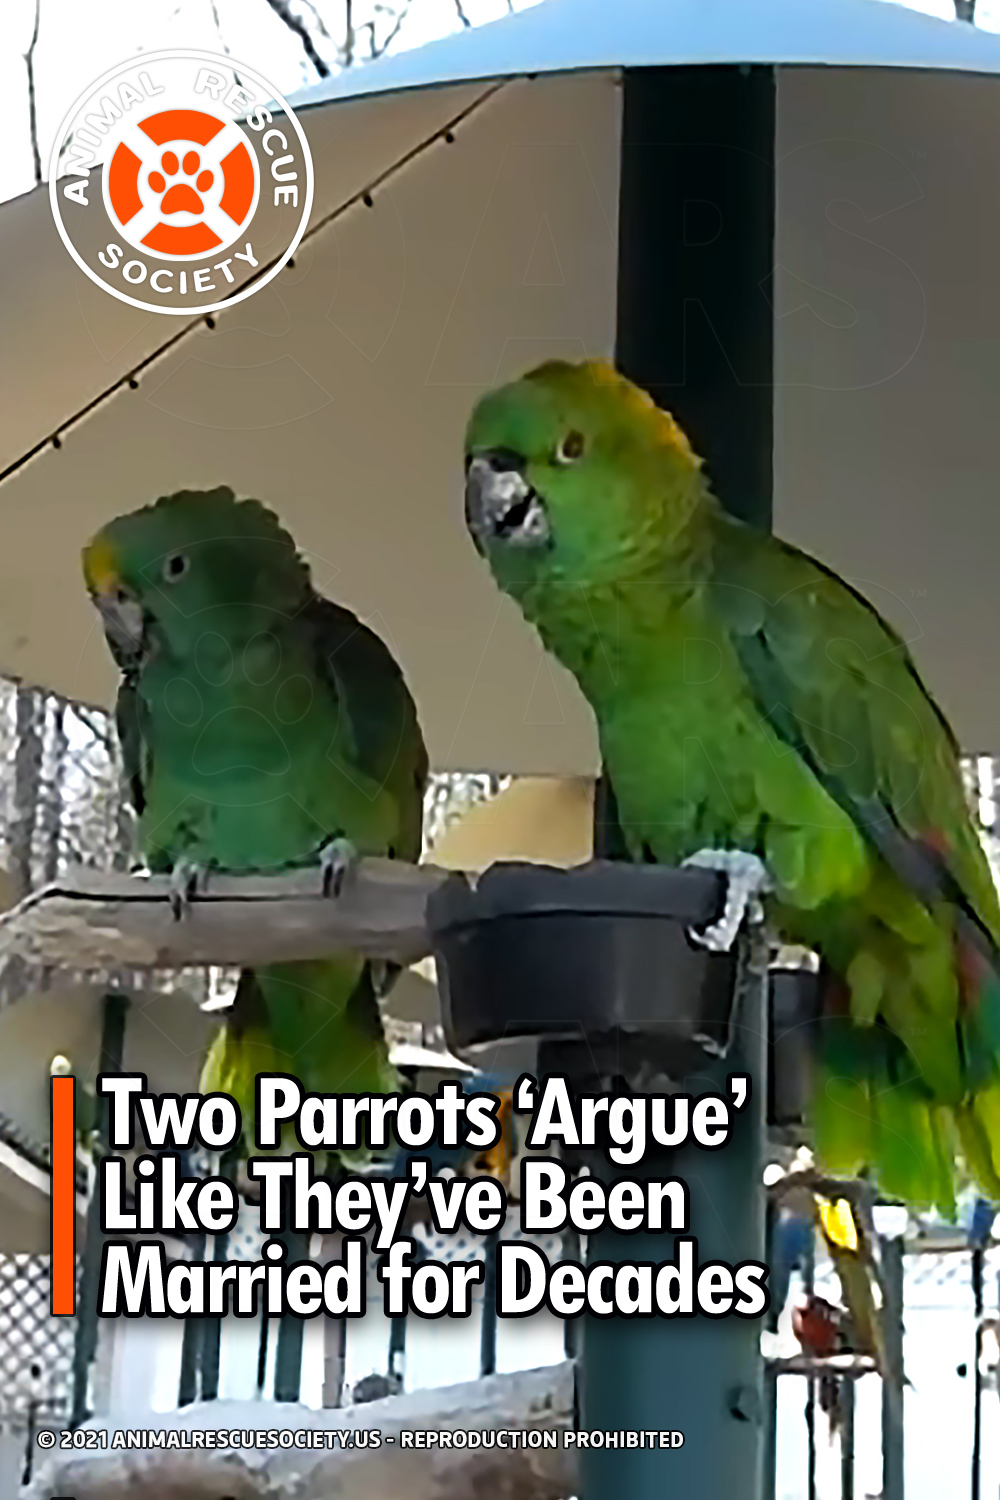 Two Parrots ‘Argue’ Like They’ve Been Married for Decades